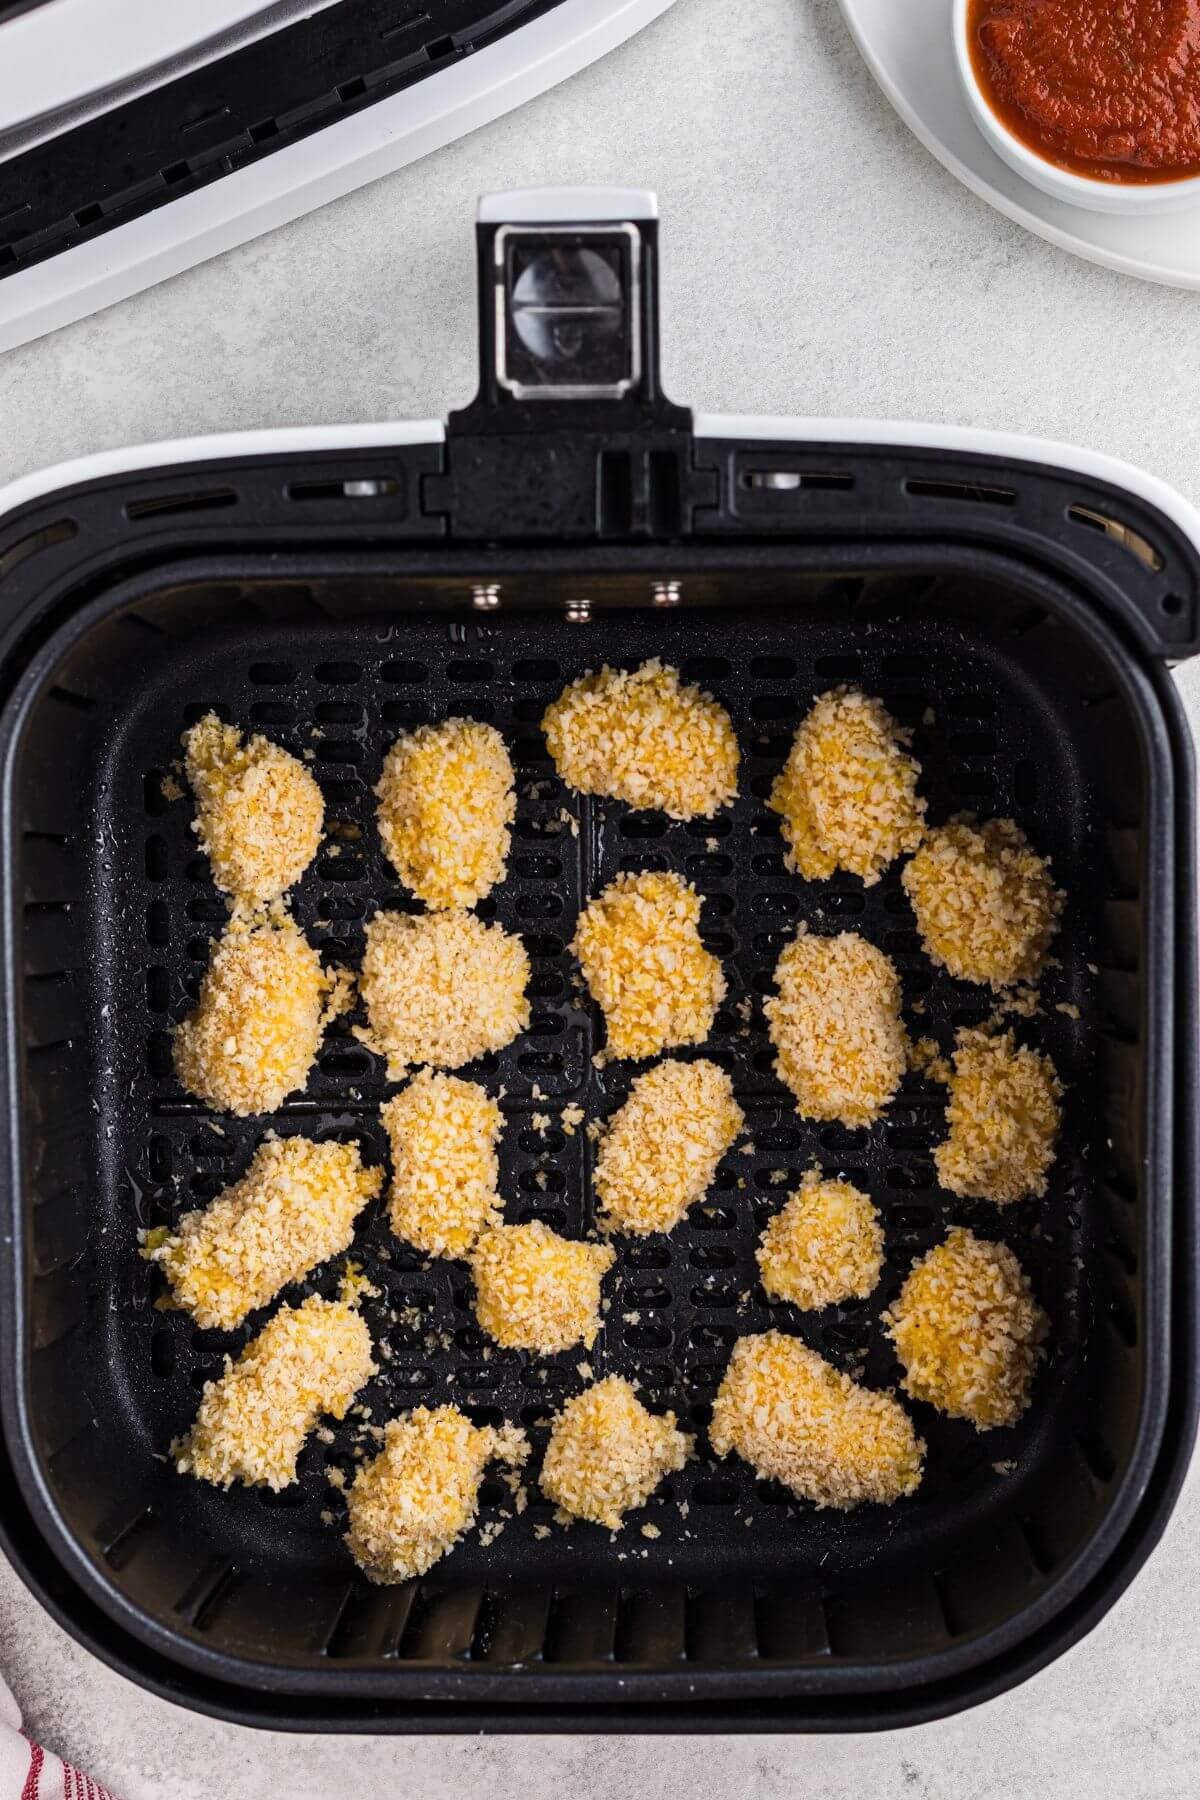 Breaded cheese curds in the air fryer basket before being cooked